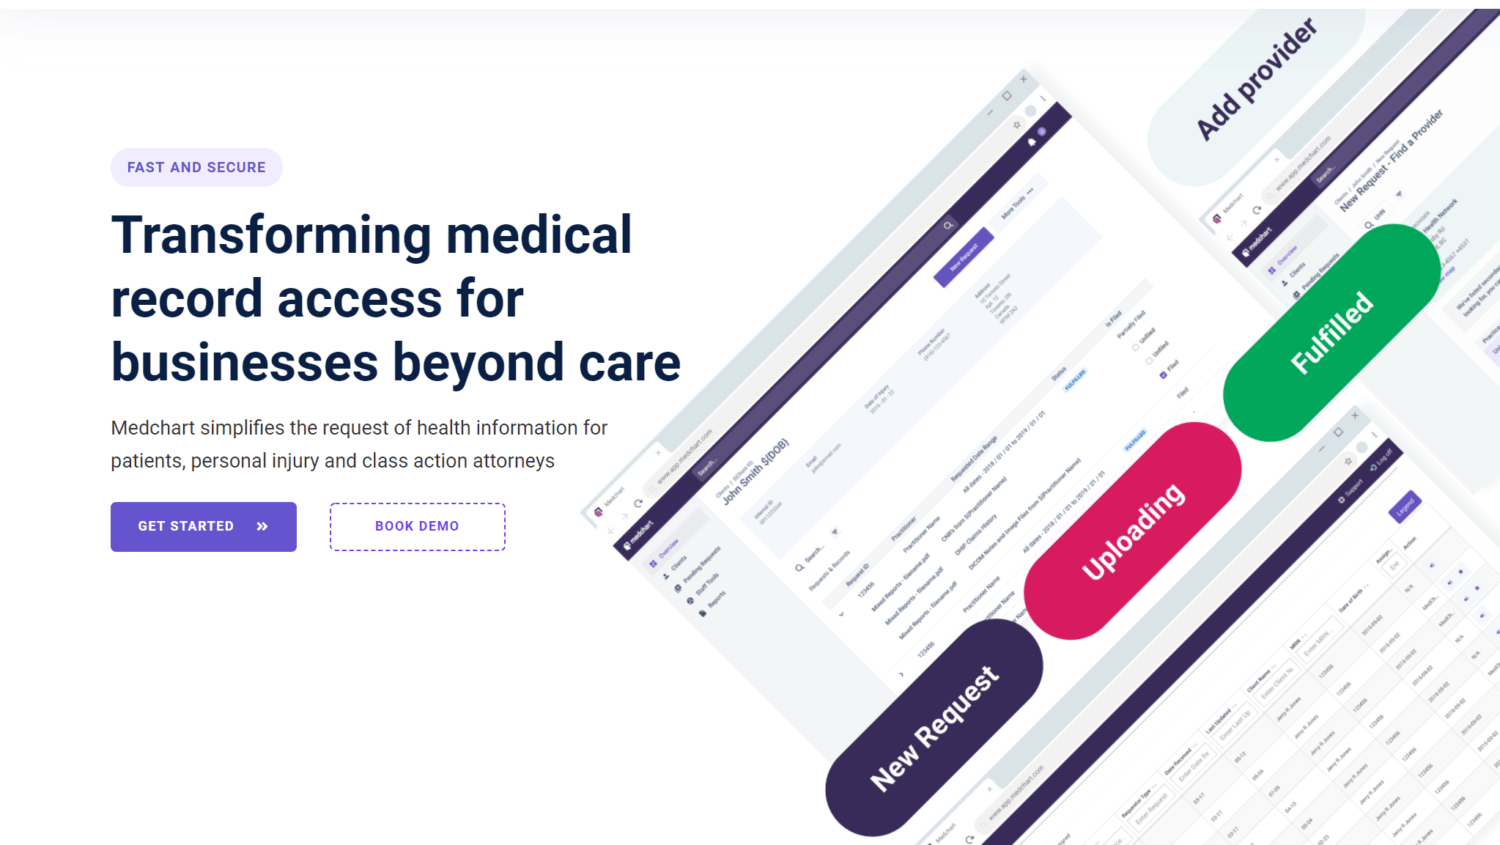 Medchart Raises $17M to Expand Medical Record Access for Businesses Transforming medical record access for businesses